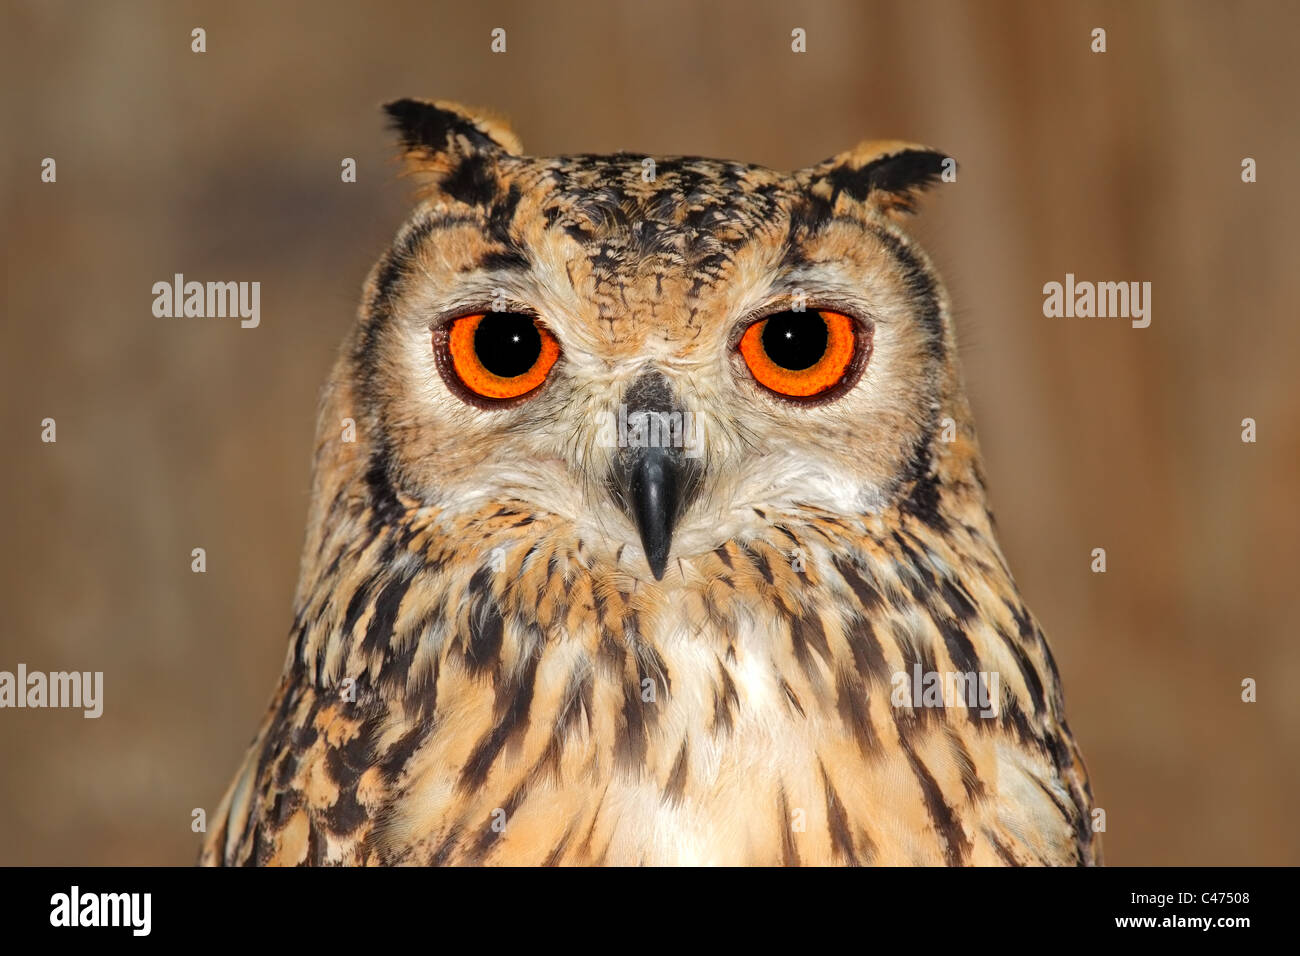 Close-up portrait of a Bengal eagle owl (Bubo bubo bengalensis) Stock Photo